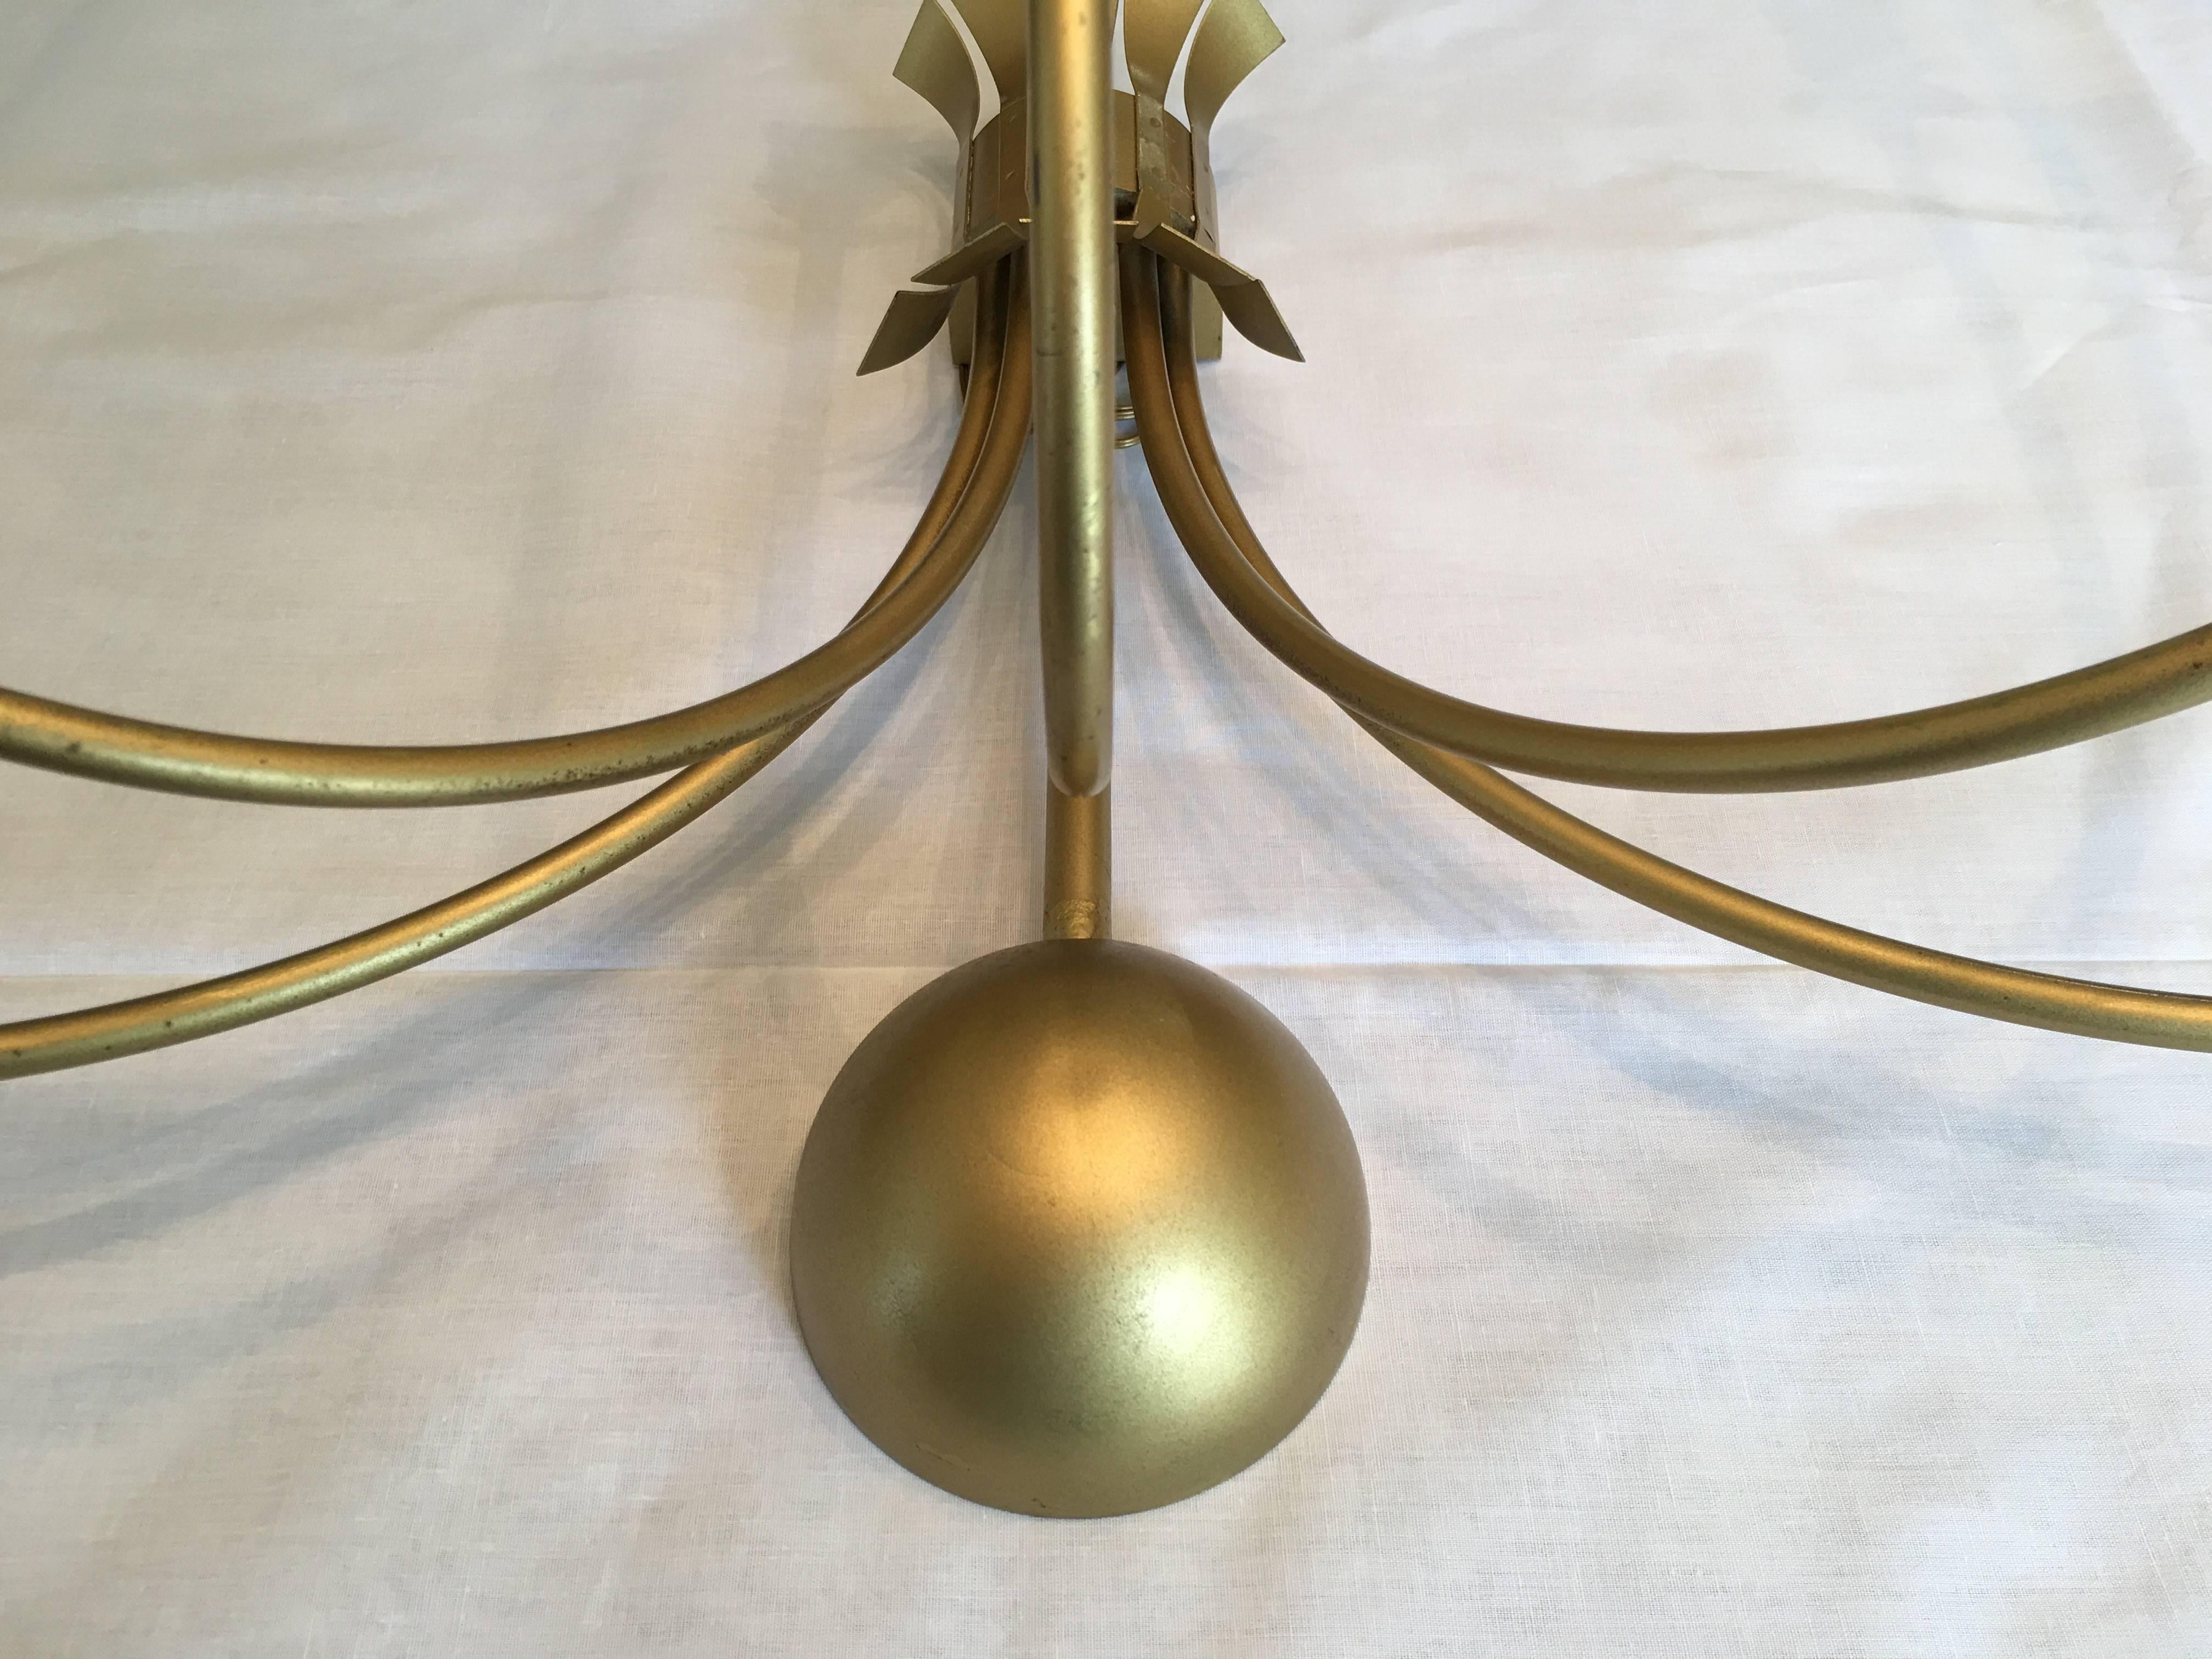 Four Monumental French Theater Sconces, Five Gilt Metal Curved Arms - 1950s For Sale 9